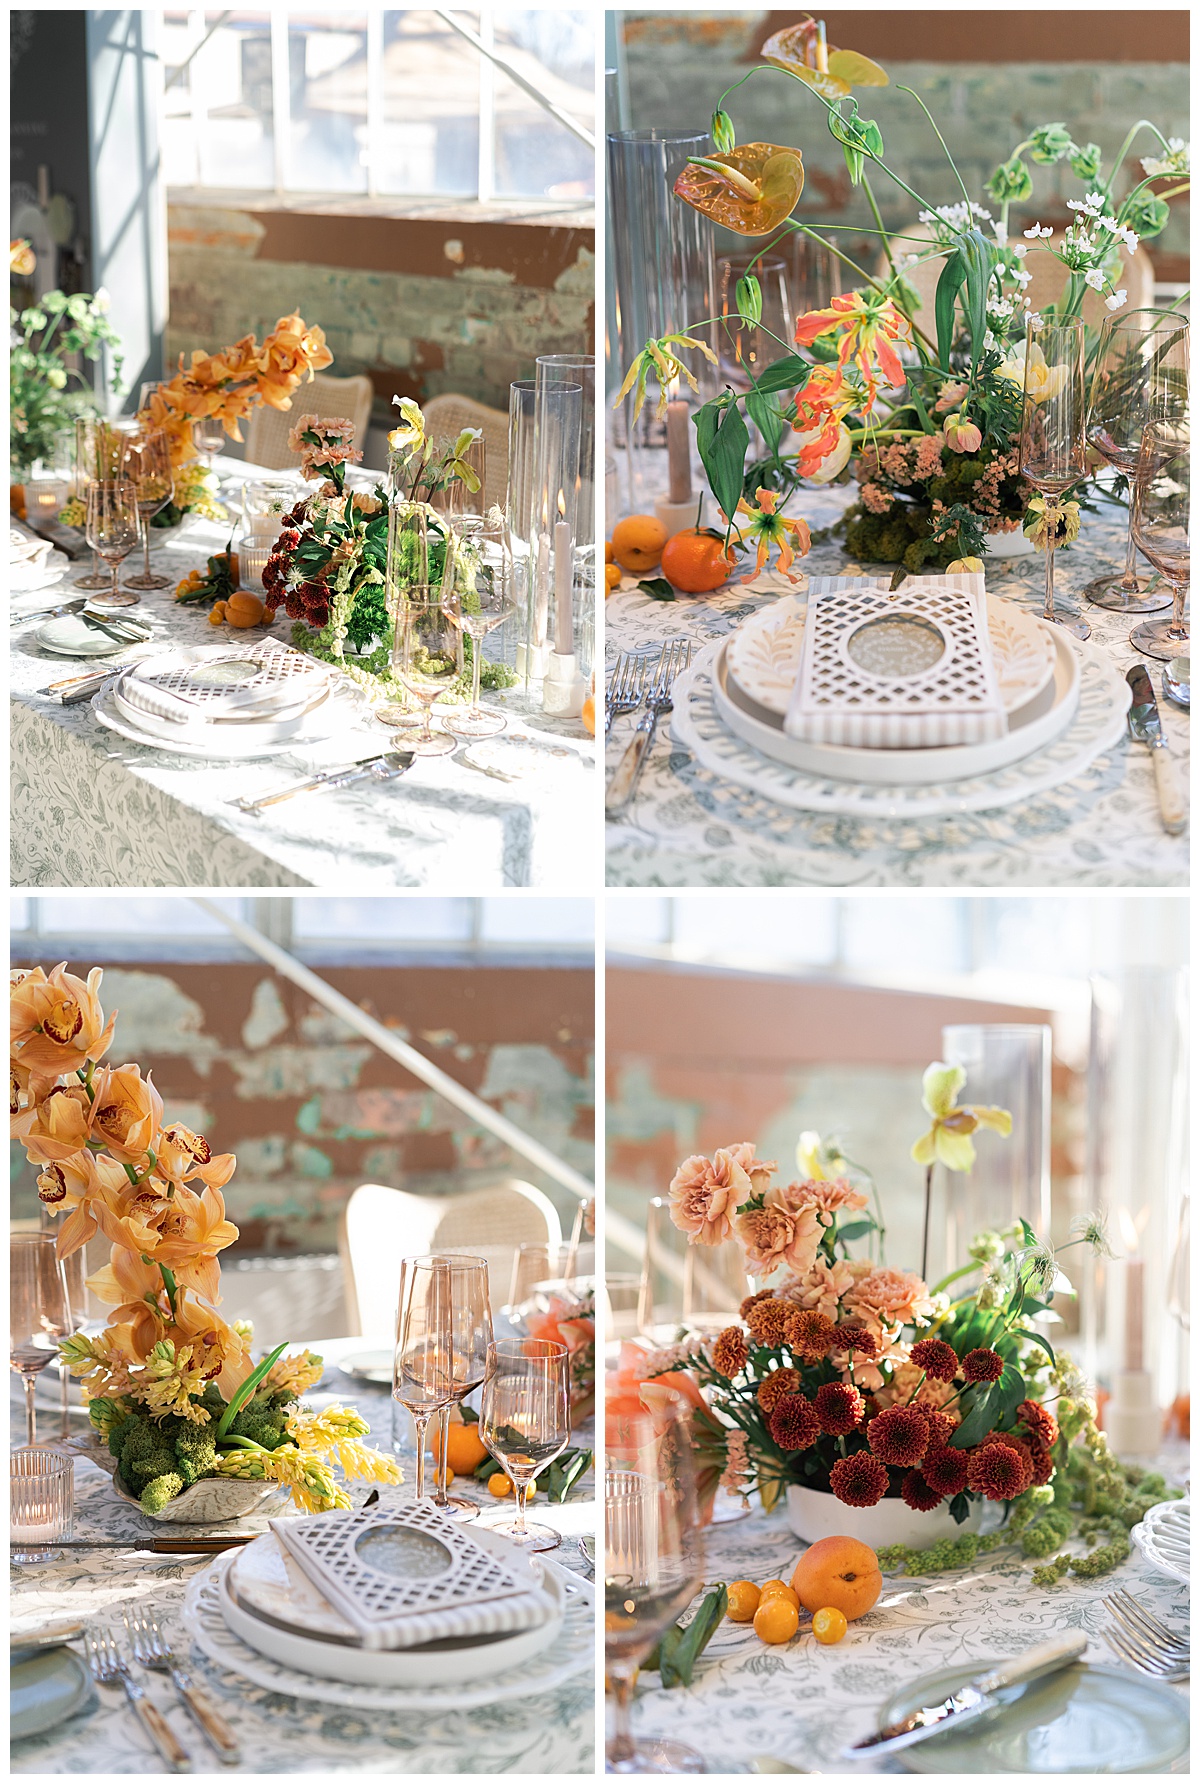 Floral arrangements and table settings at the Wed Well Showcase